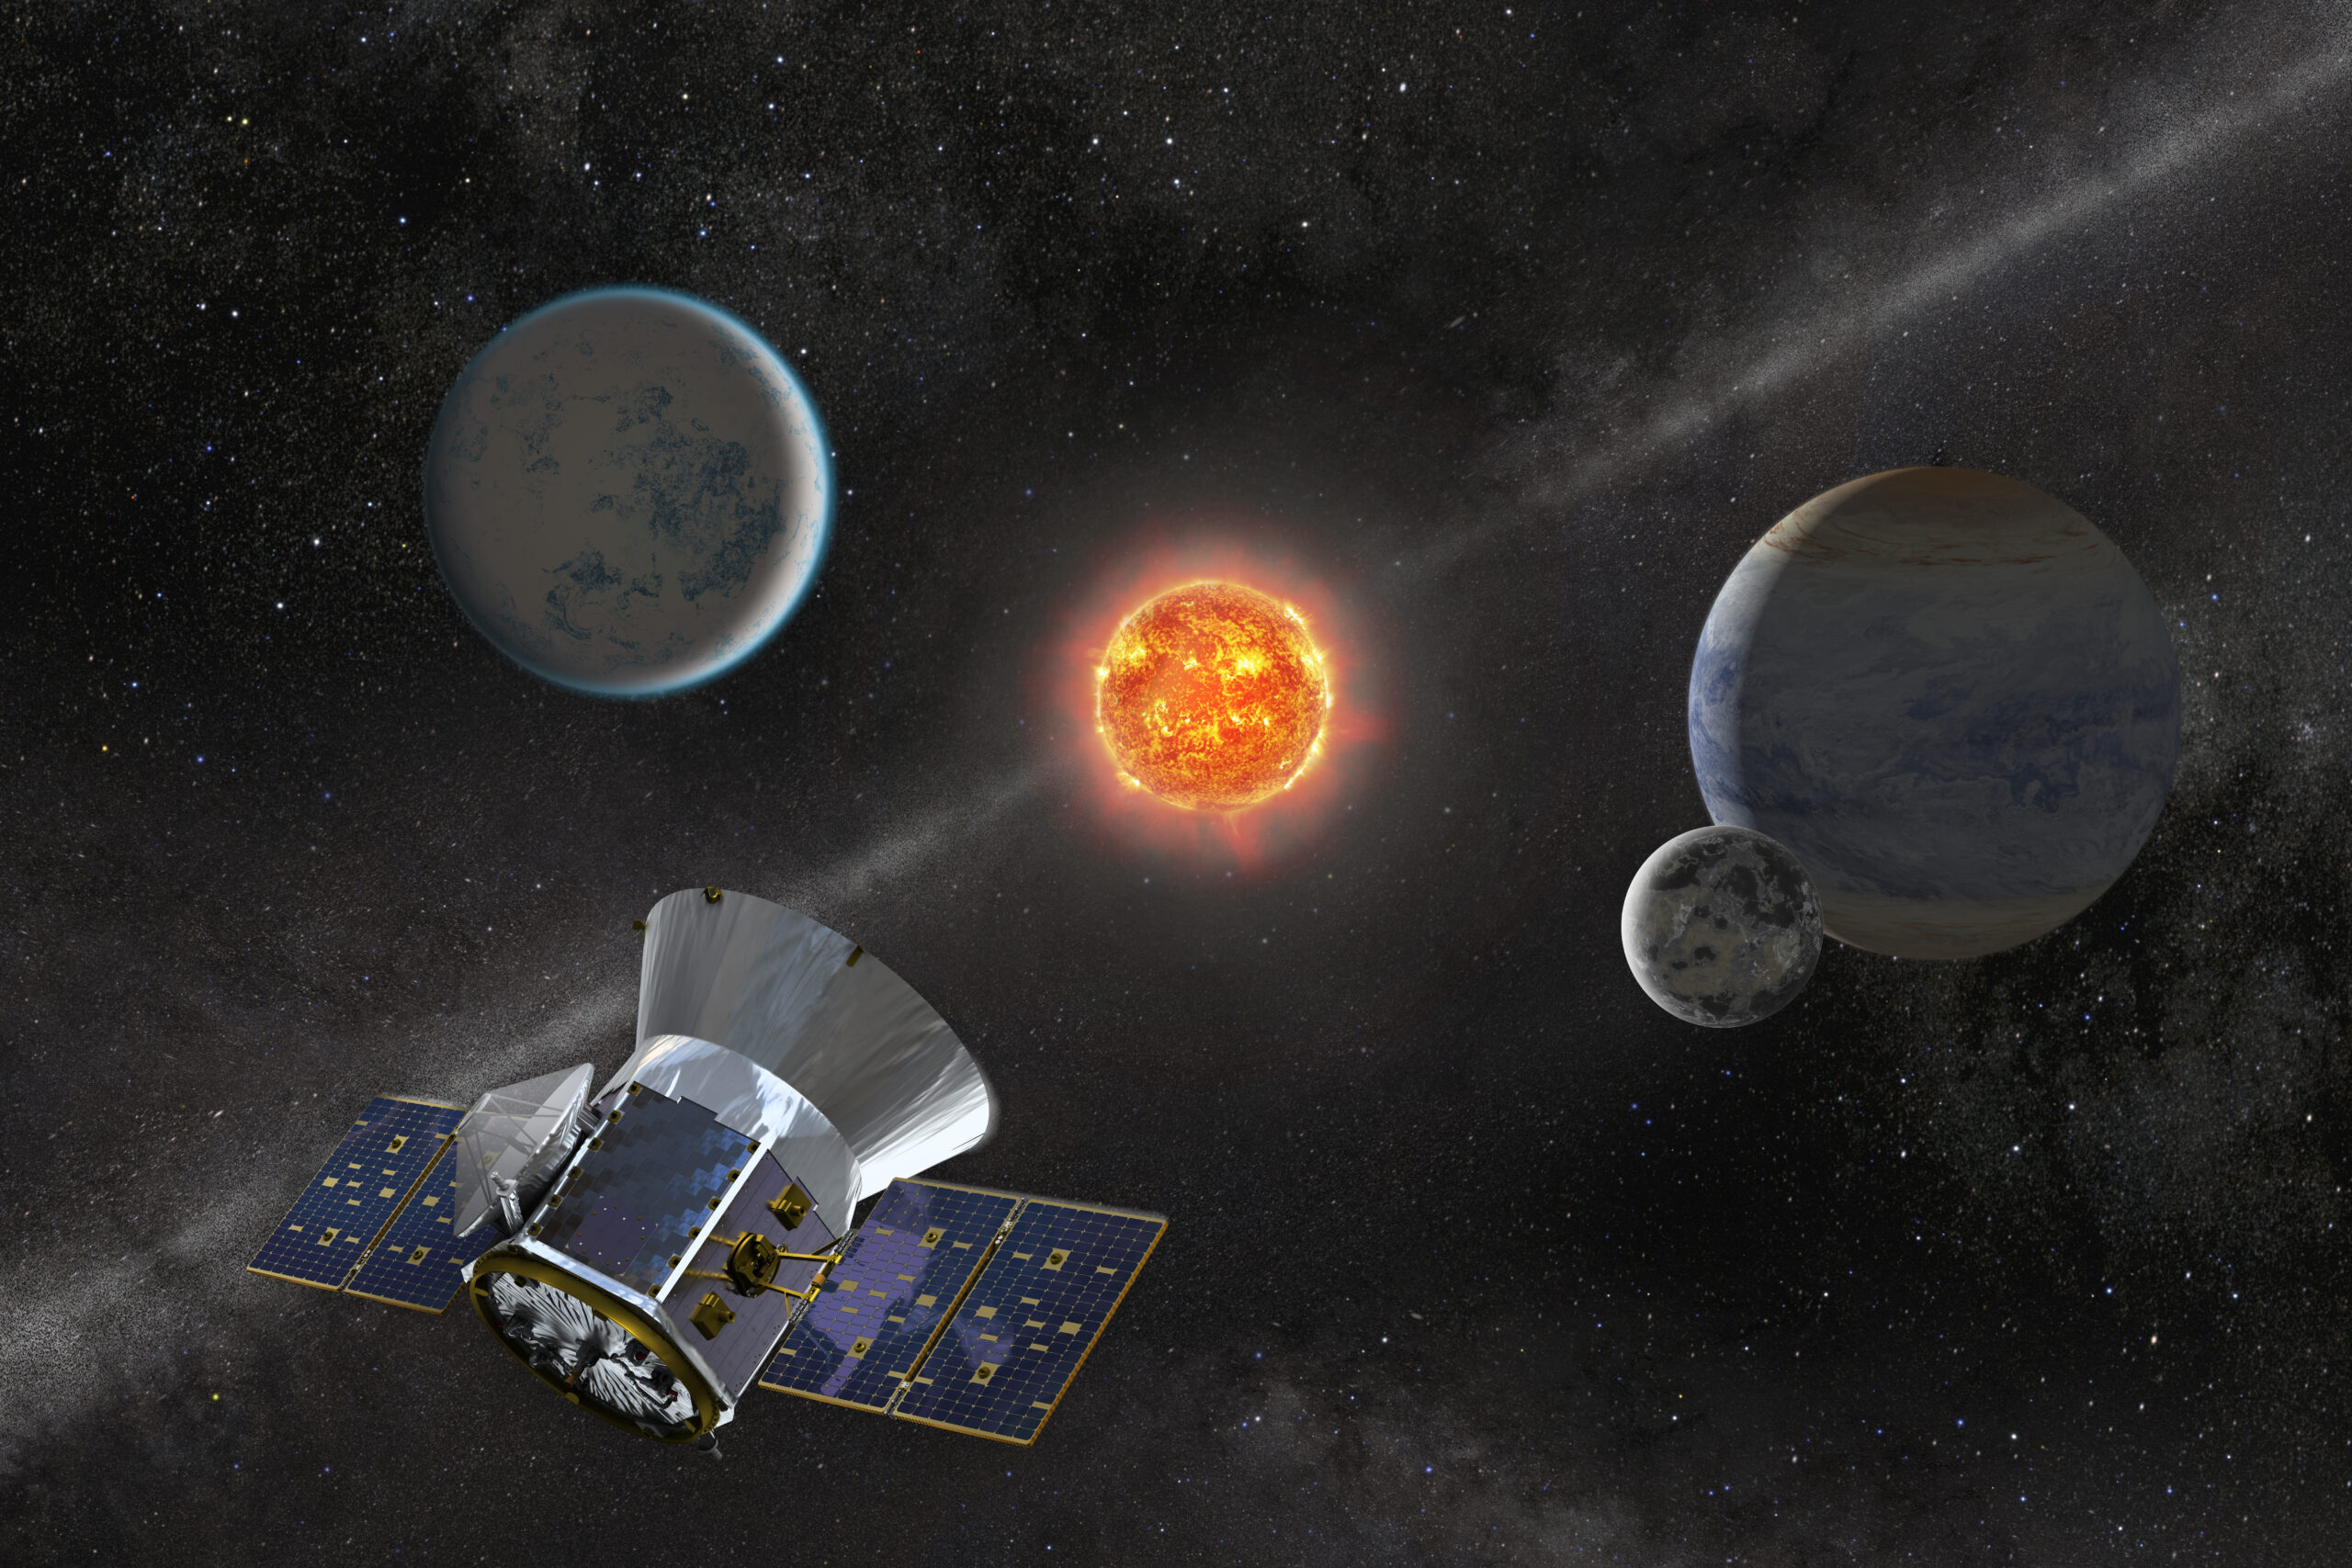 TESS space telescope looking at a star with orbiting planets - artist rendering